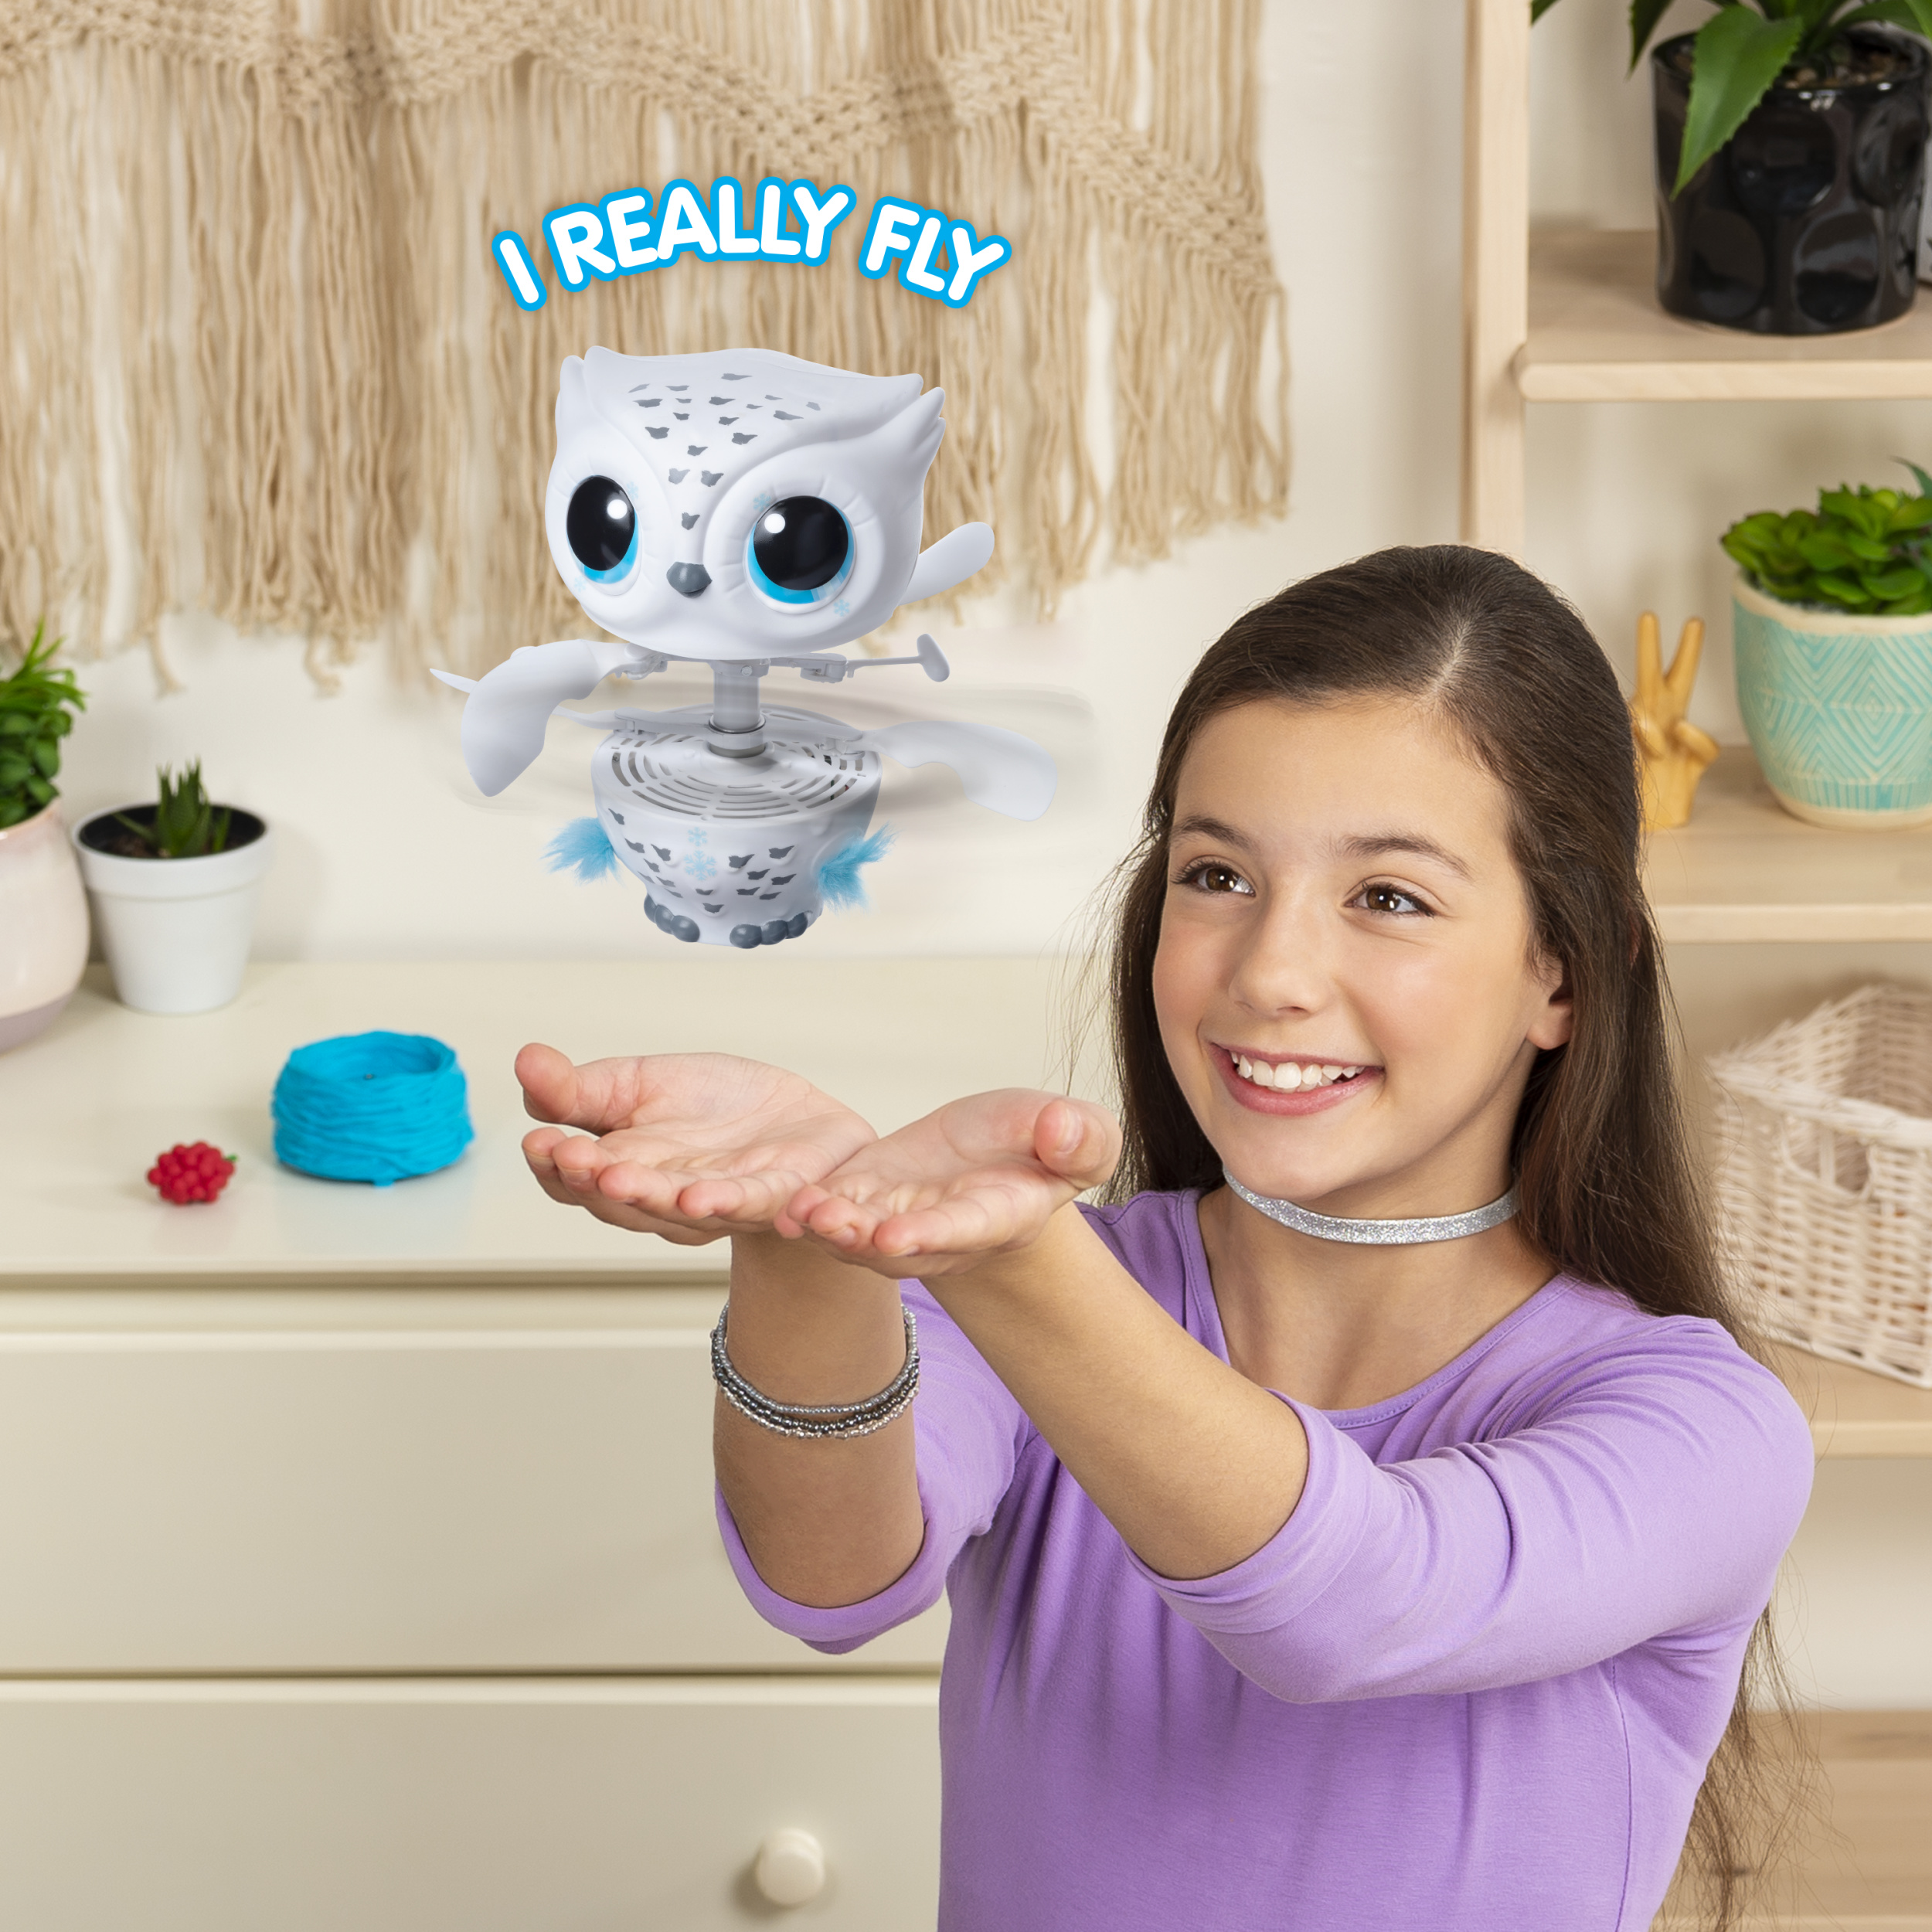 Owleez, Flying Baby Owl Interactive Electronic Pet Toy with Lights and Sounds (White), for Kids Aged 6 and up - image 4 of 8